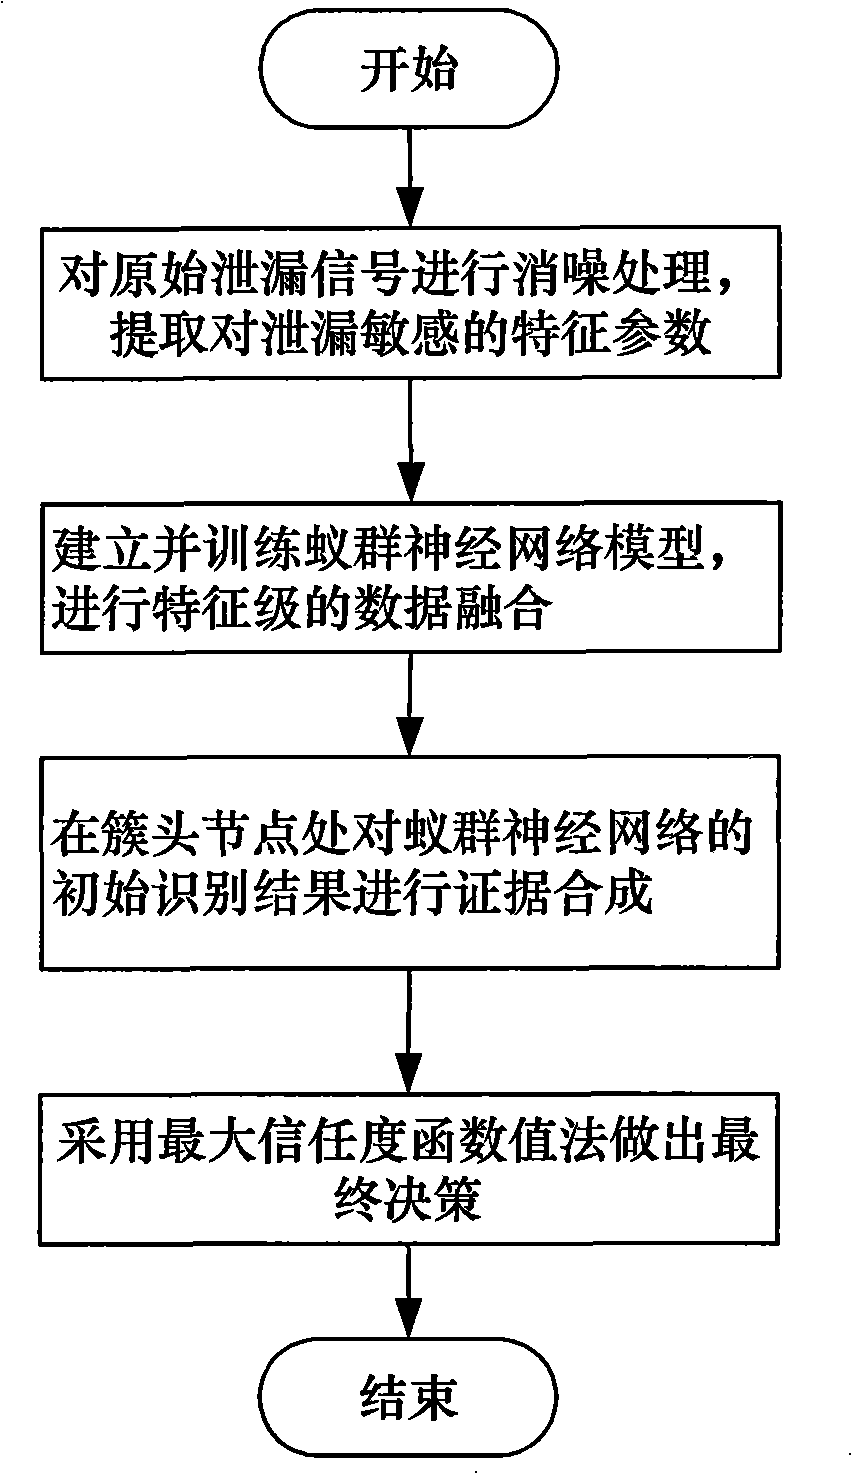 Hierarchical multi-source data fusion method for pipeline linkage monitoring network